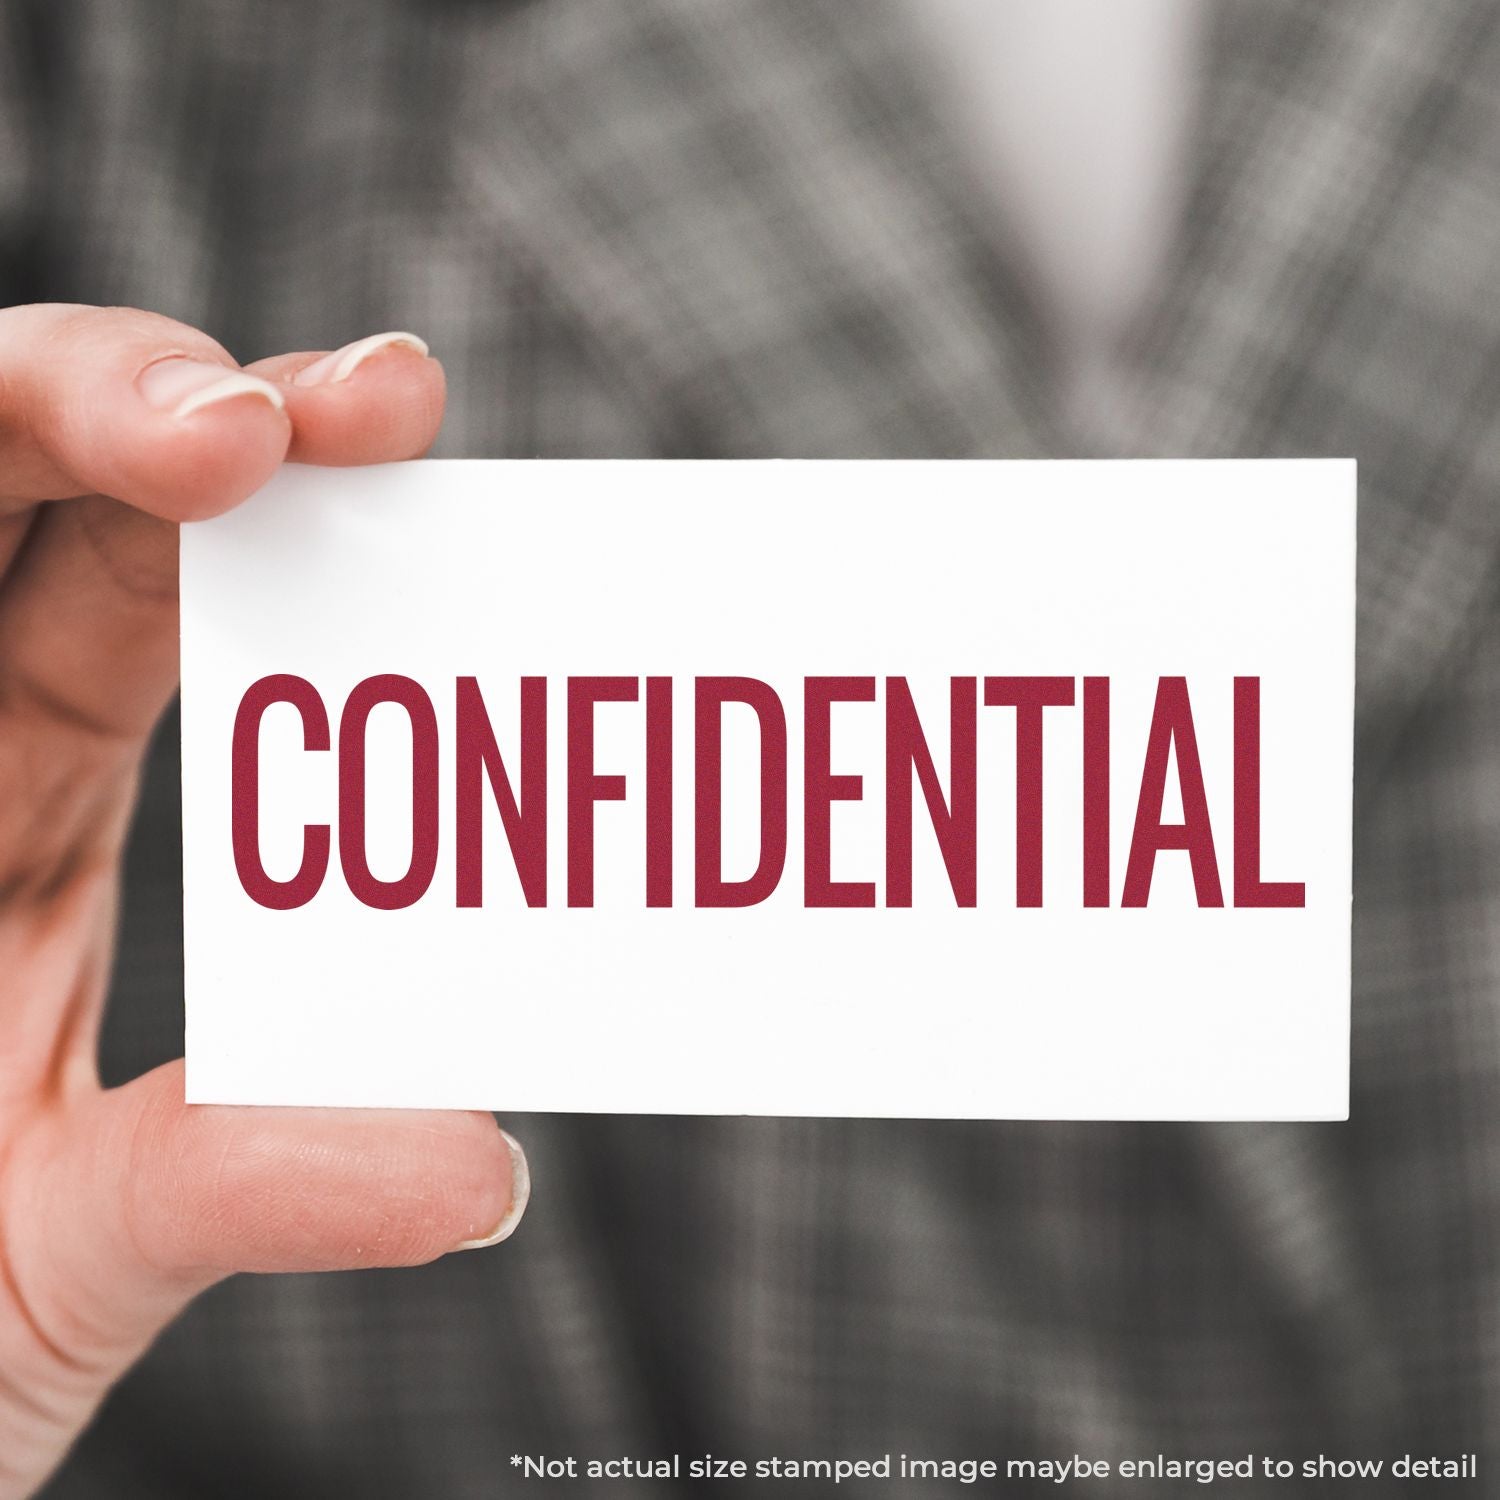 A self-inking stamp with a stamped image showing how the text "CONFIDENTIAL" in a narrow font is displayed after stamping.